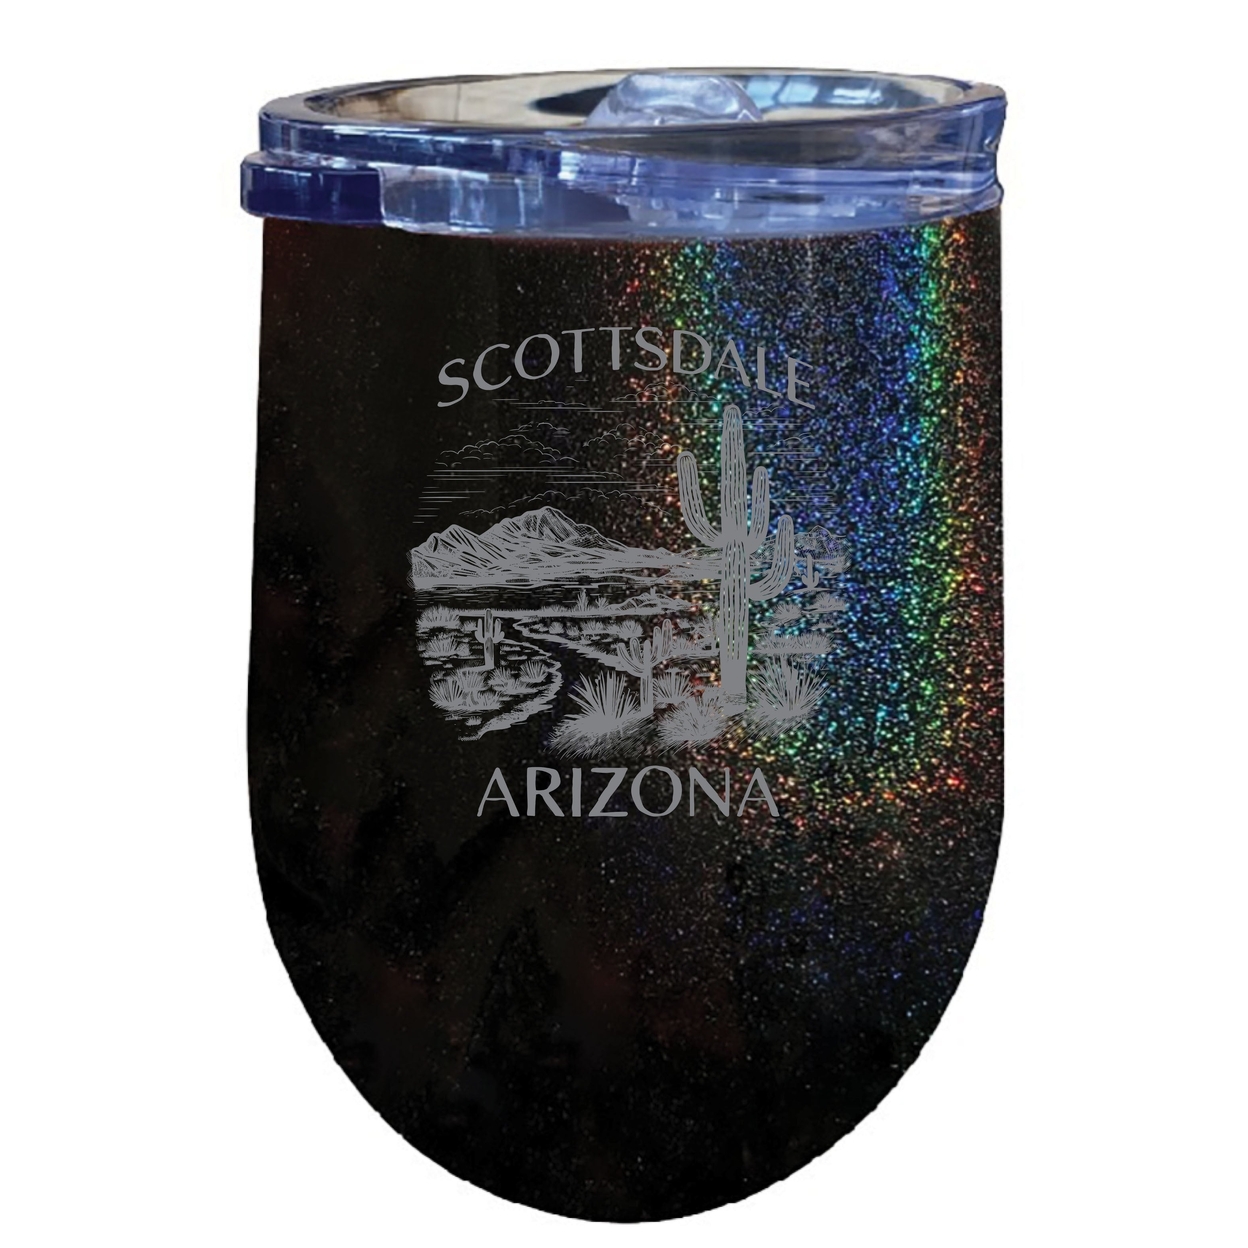 Scottsdale Arizona Souvenir 12 Oz Engraved Insulated Wine Stainless Steel Tumbler - Coral,,4-Pack